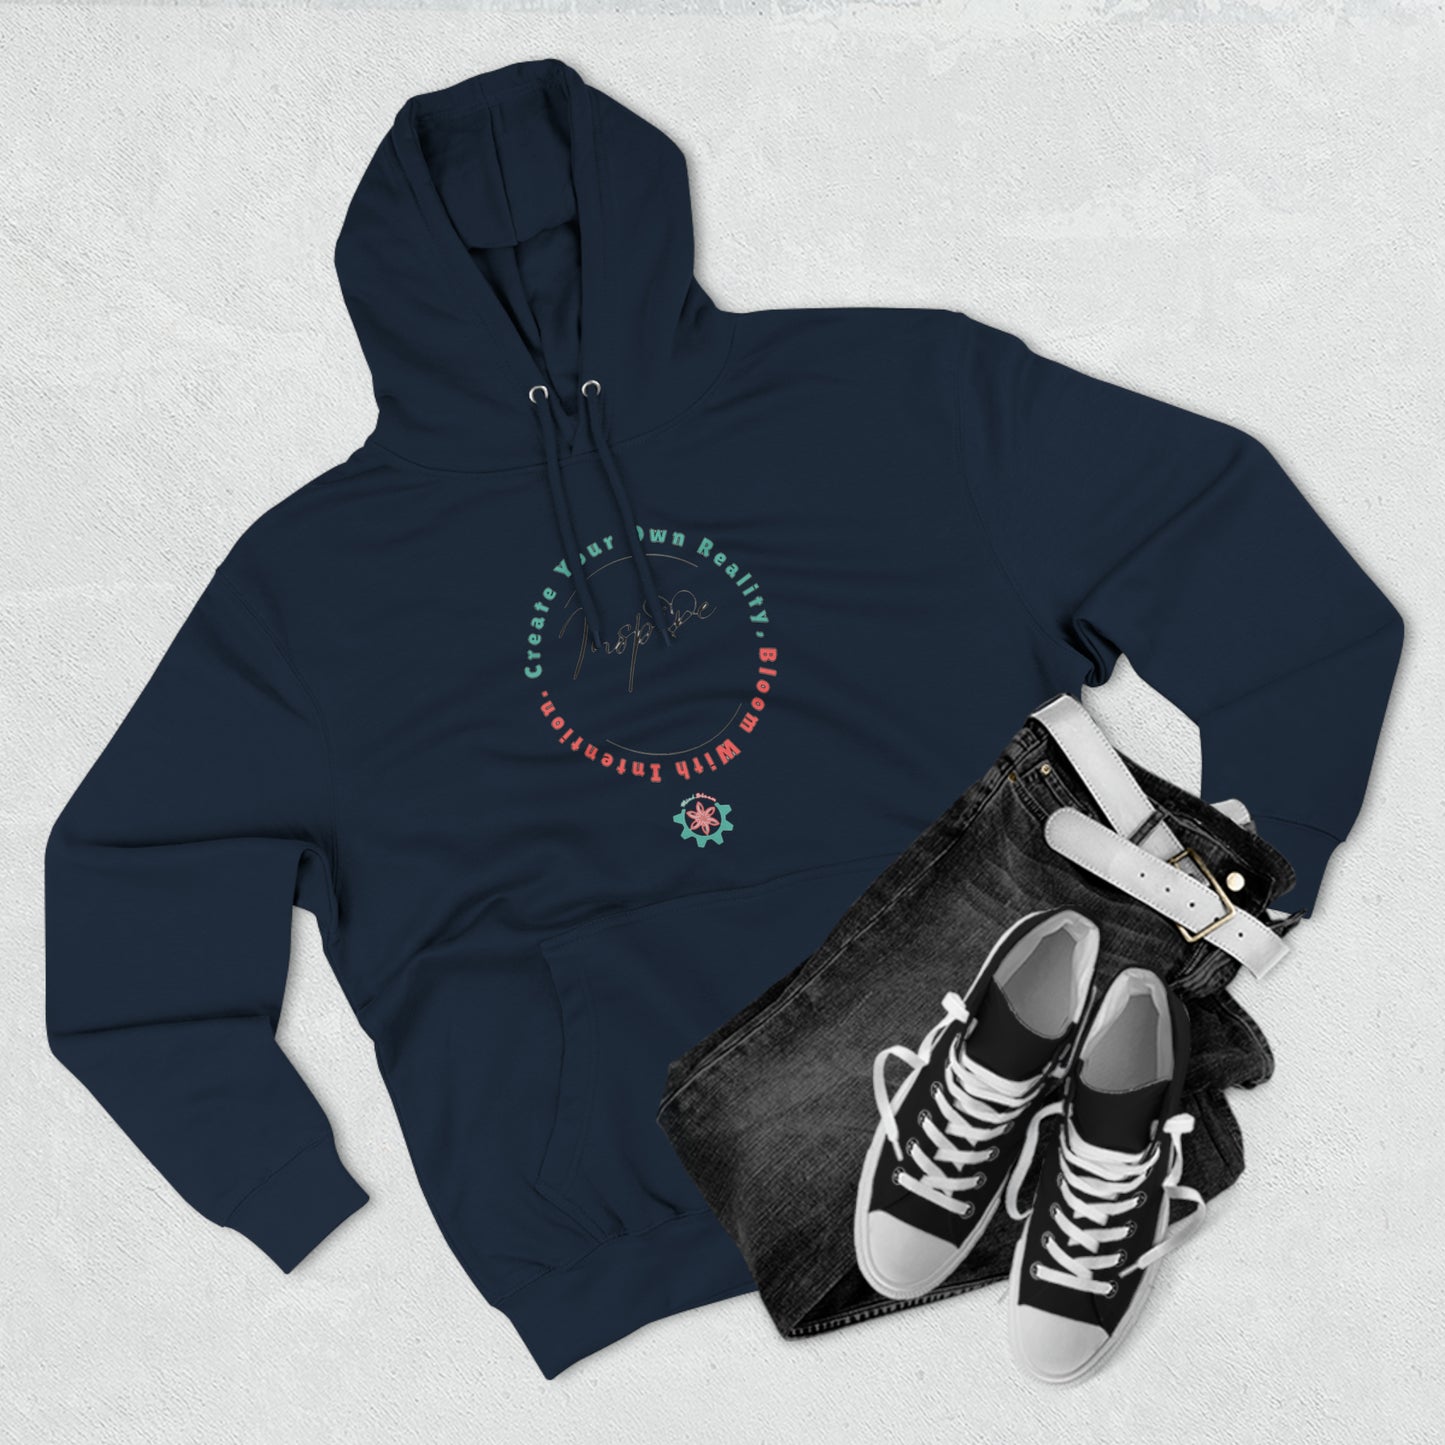 Unisex Premium Pullover Hoodie 'Create your own reality, bloom with intention' Mind bloom